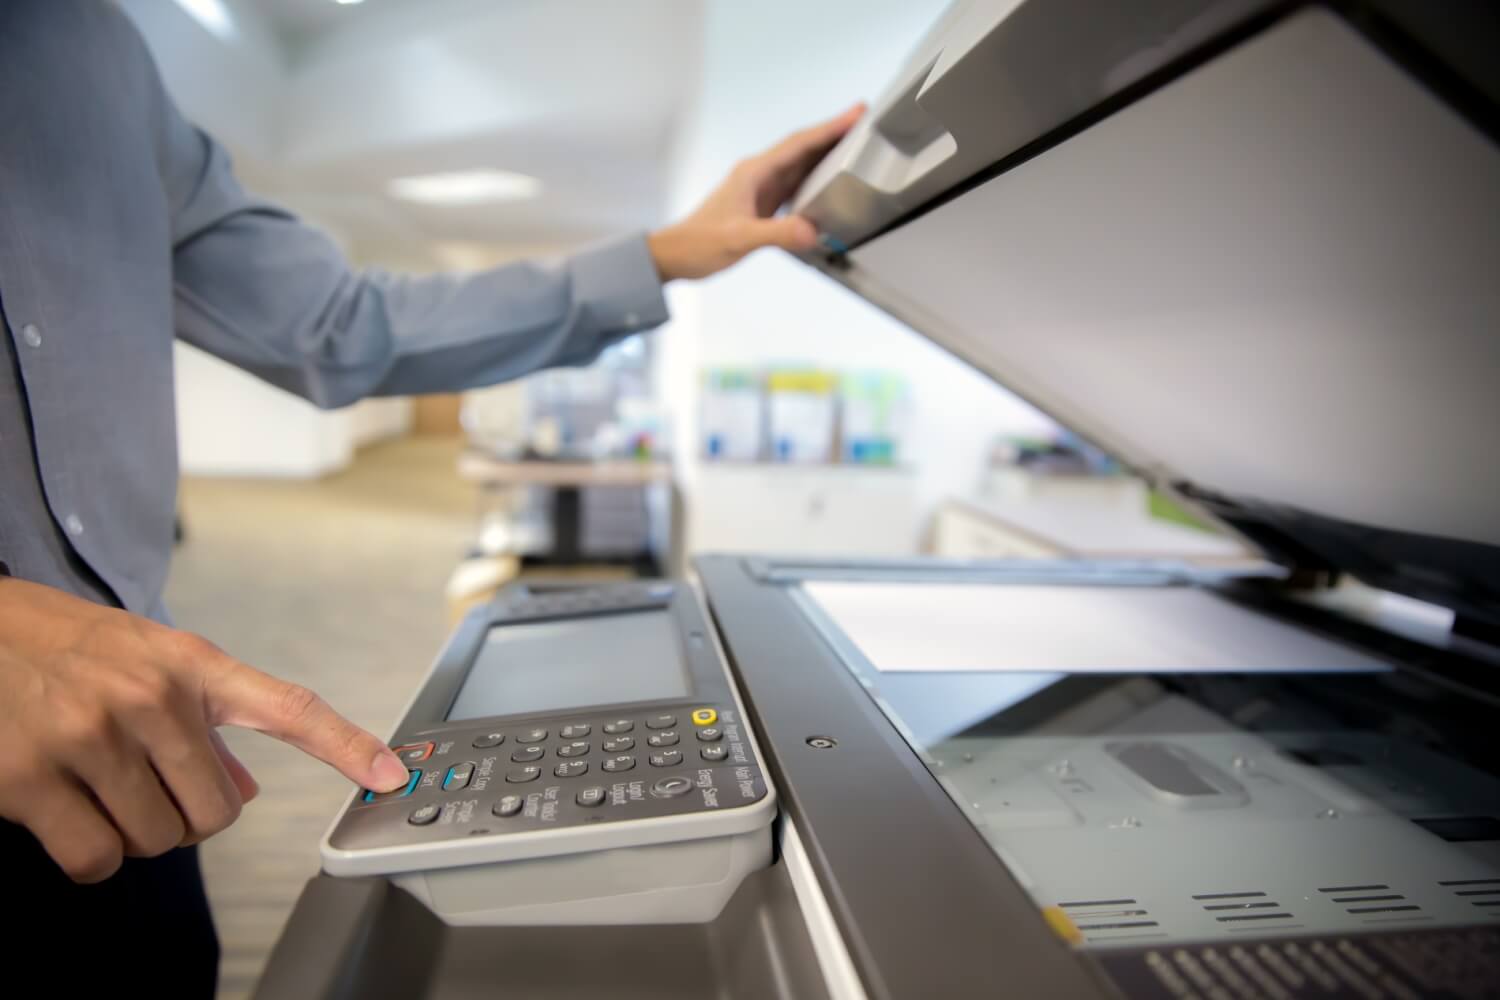 When to Call a Technician to Repair Your Printer?